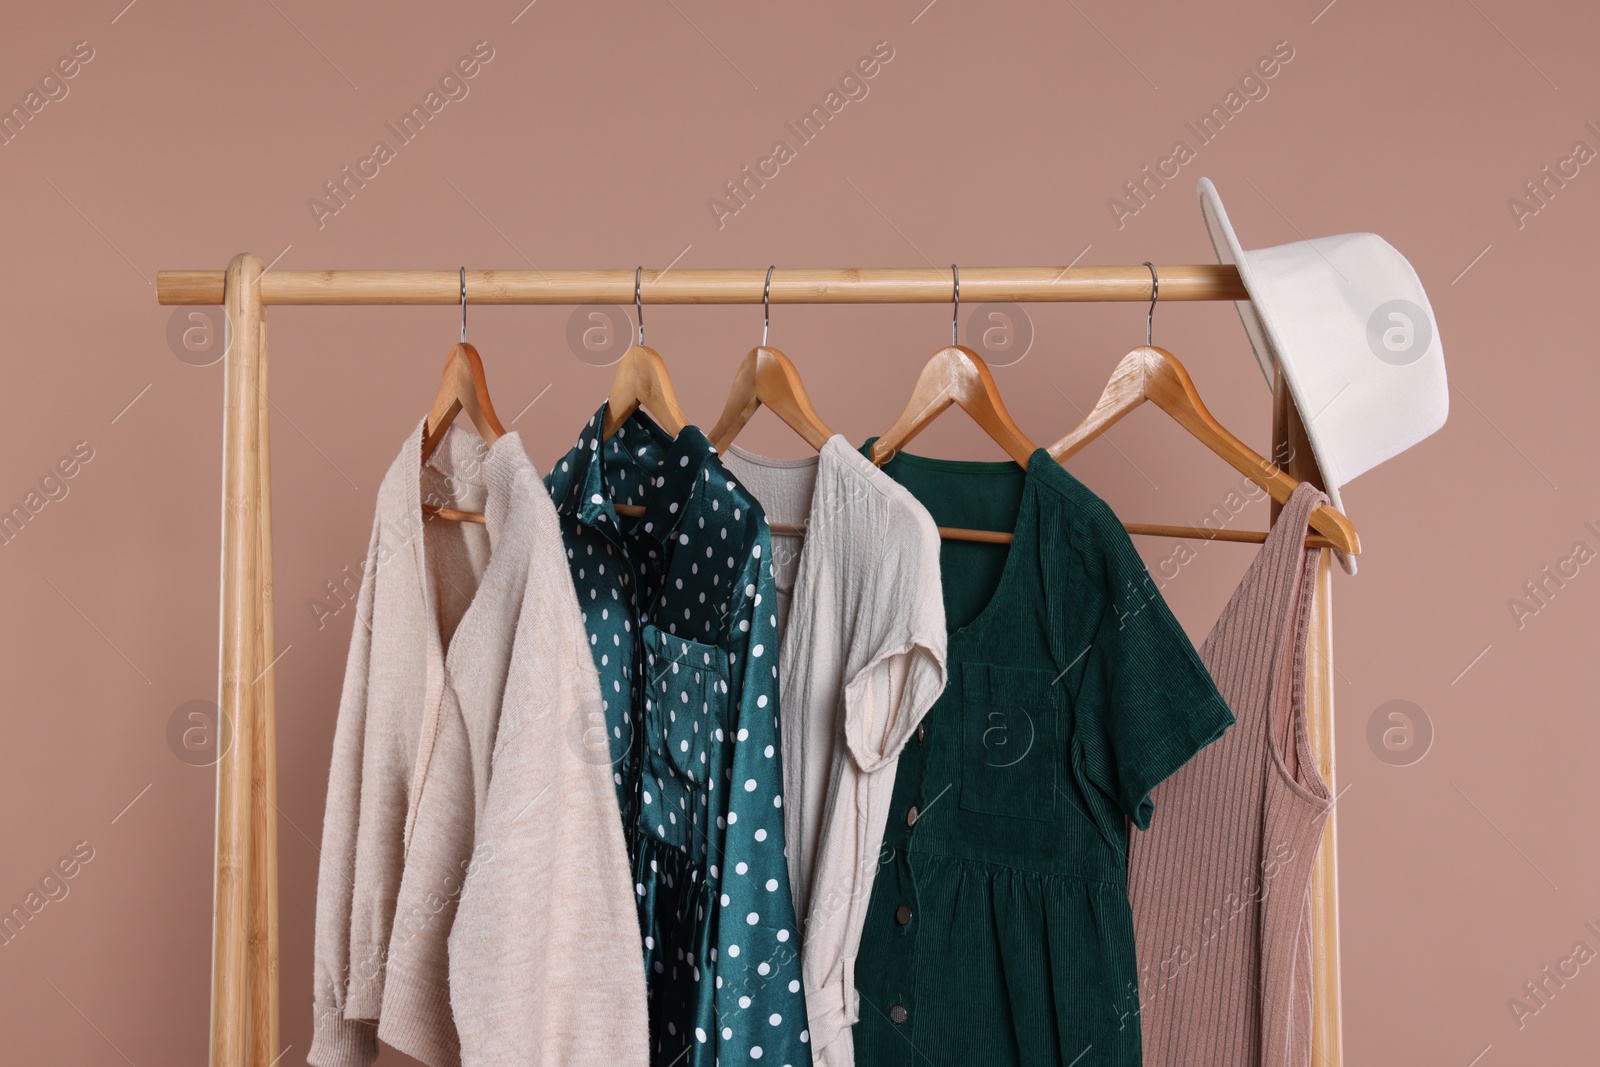 Photo of Rack with hat and stylish women`s clothes on wooden hangers against beige background